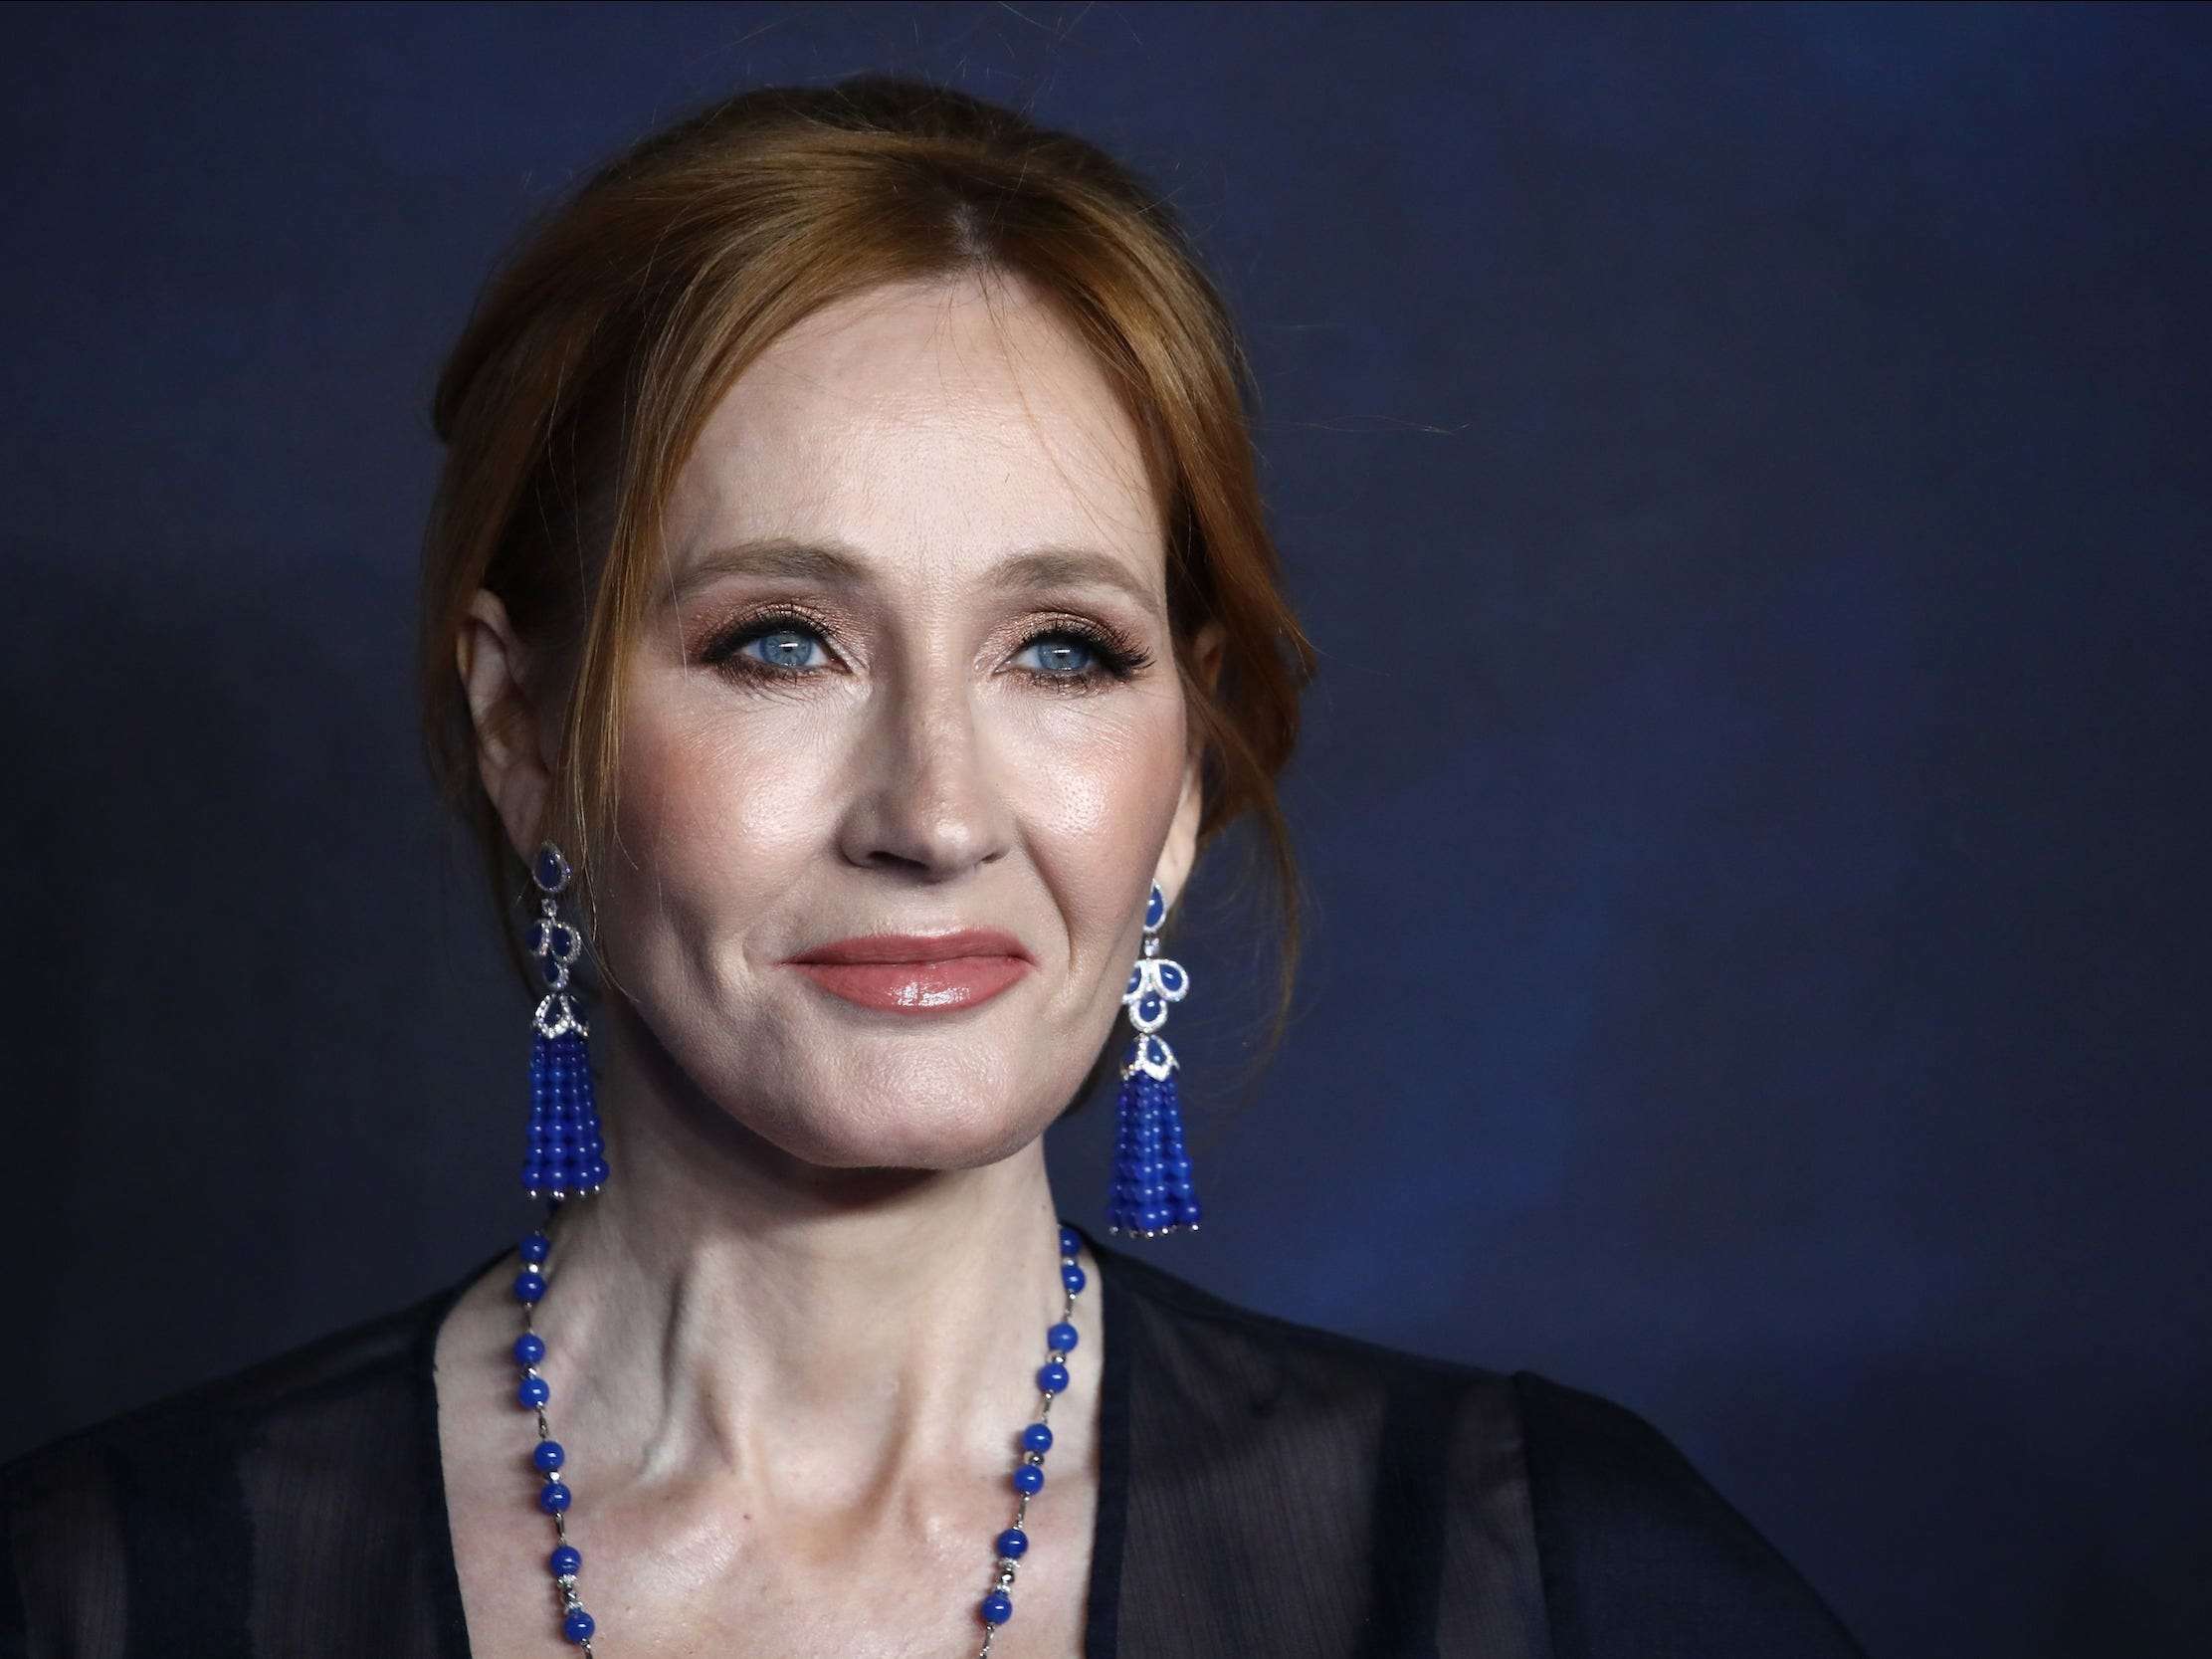 j-k-rowling-is-worth-at-least-670-million-though-some-say-she-s-a